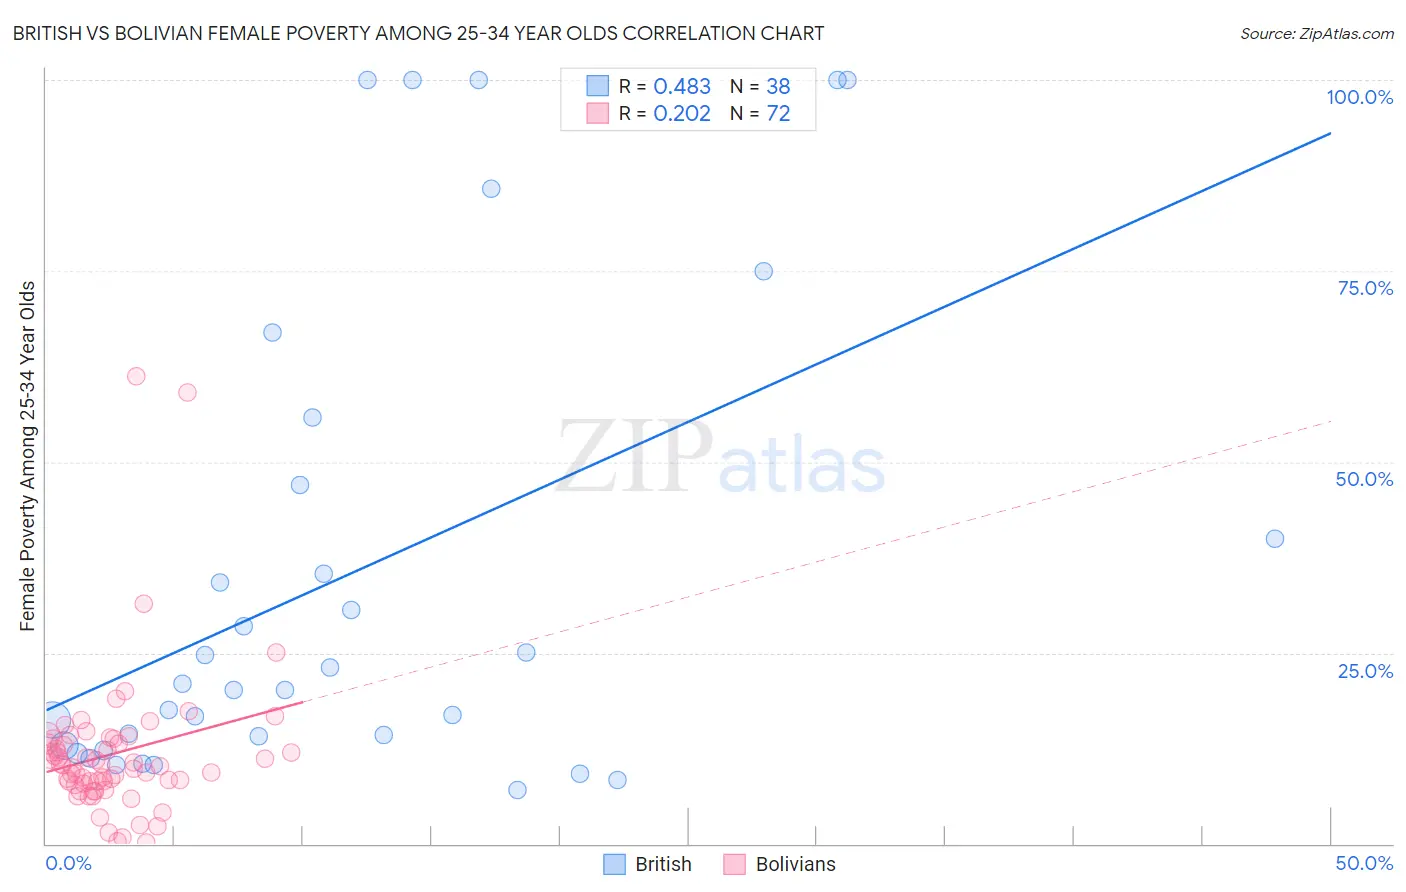 British vs Bolivian Female Poverty Among 25-34 Year Olds